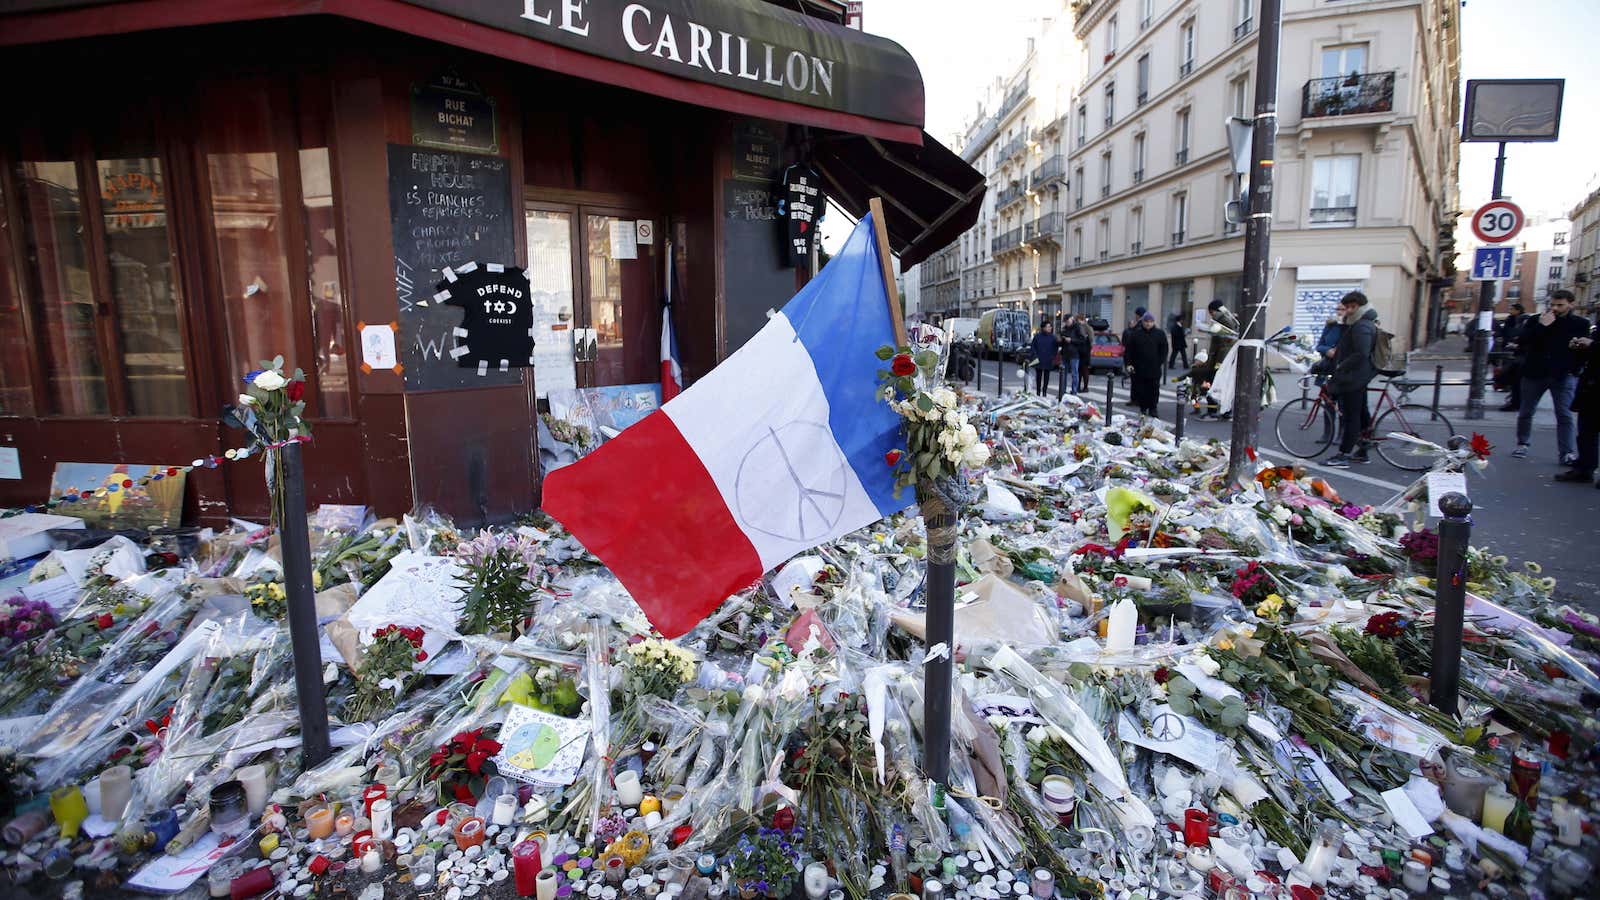 Outside “Le Carillon” restaurant a week after a series of deadly attacks in Paris.